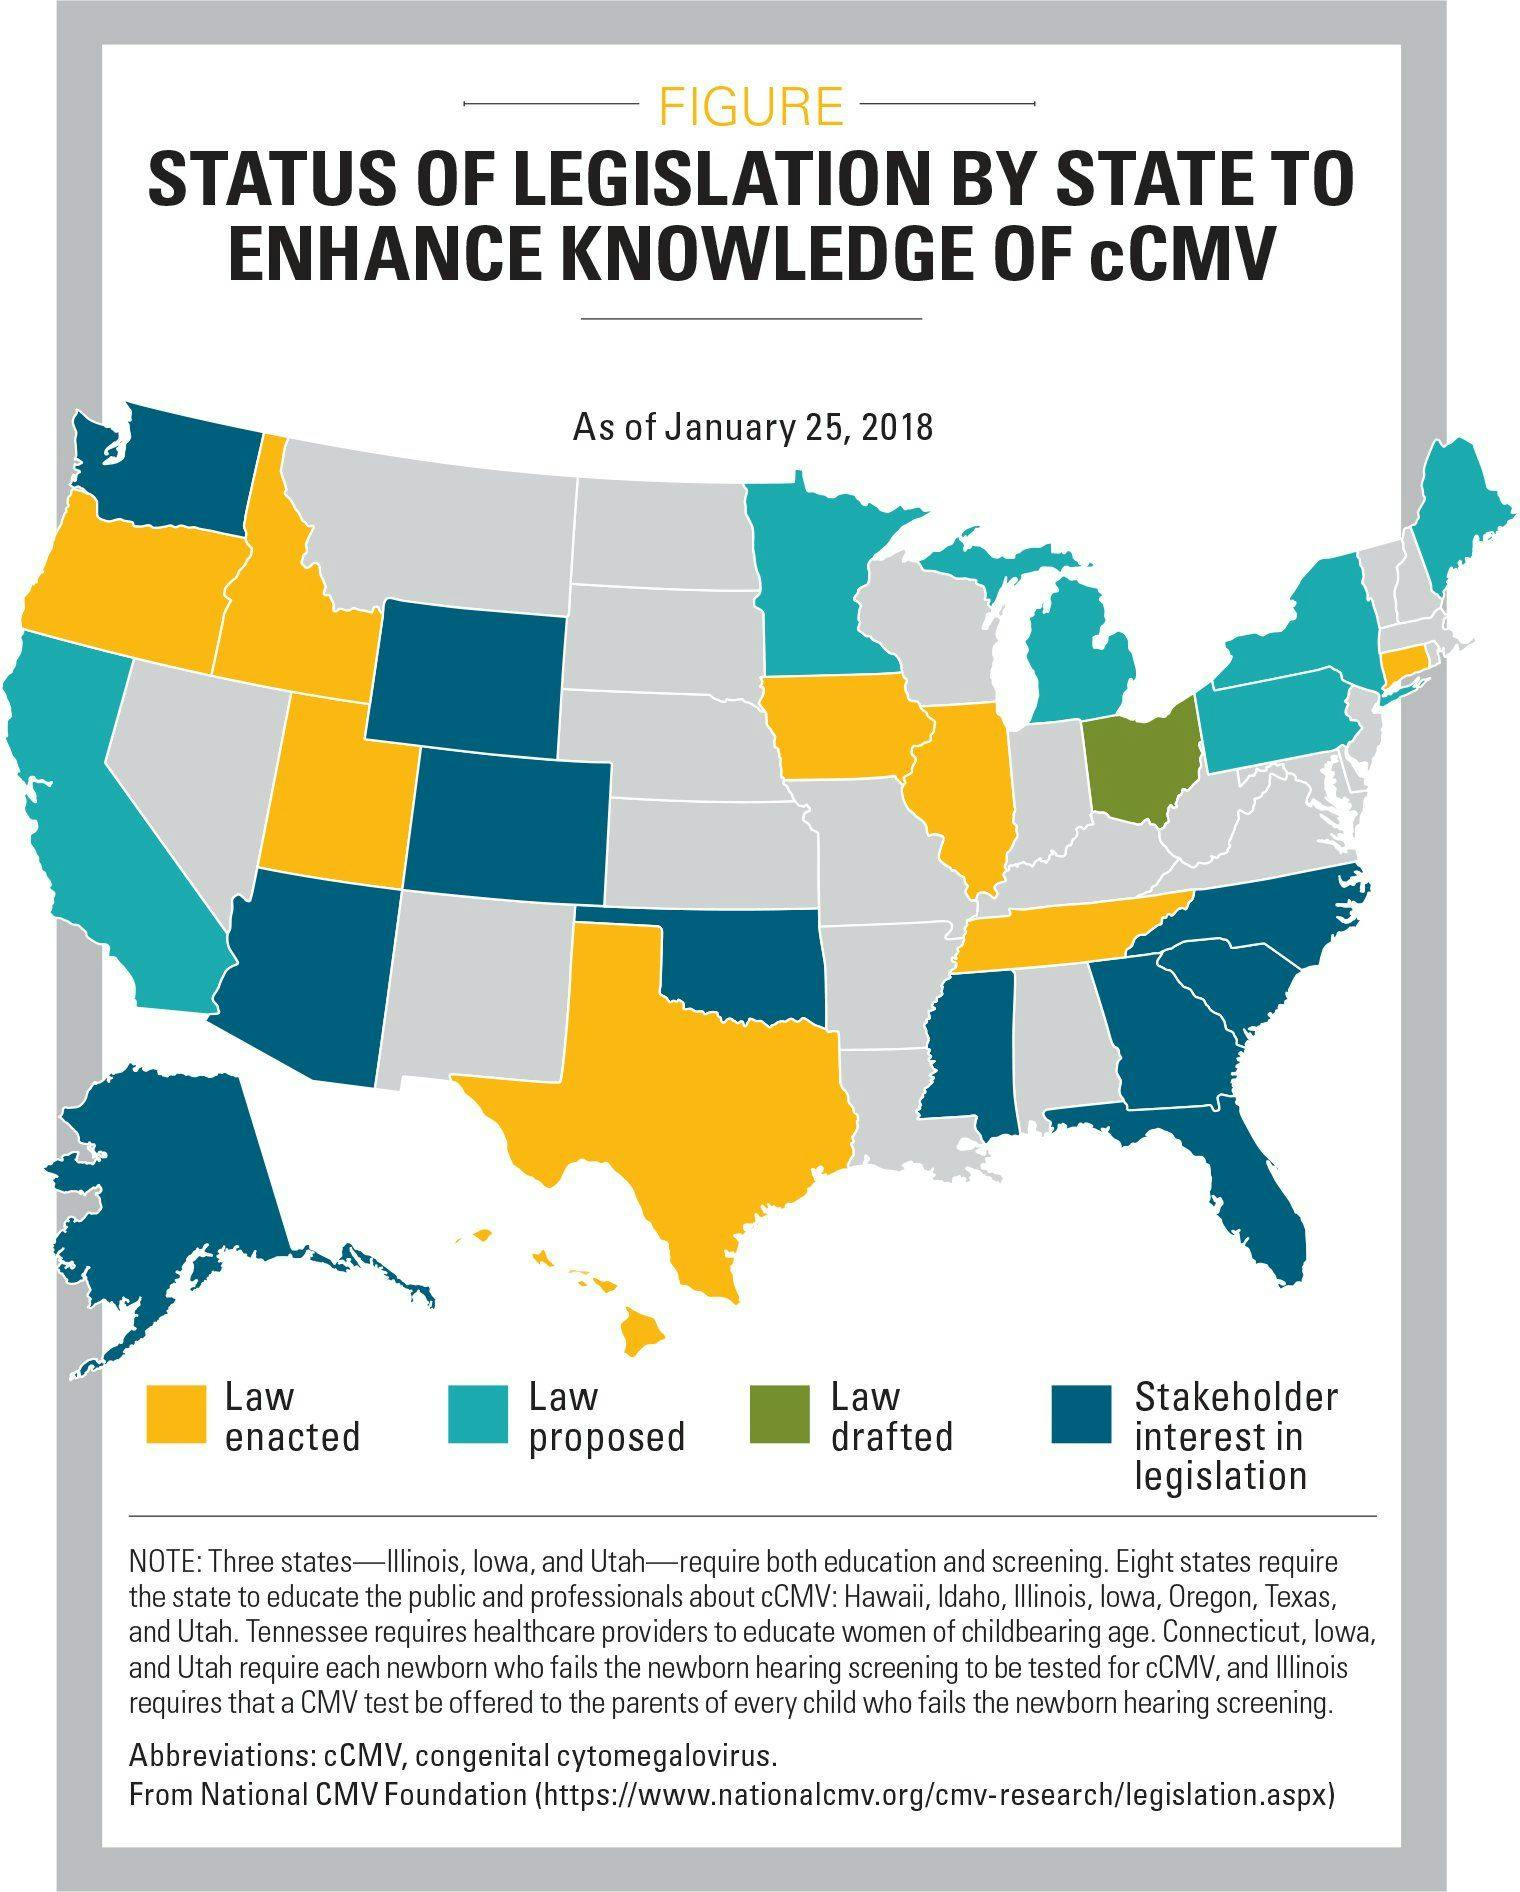 Status of legislation by state to enhance knowledge of cCMV